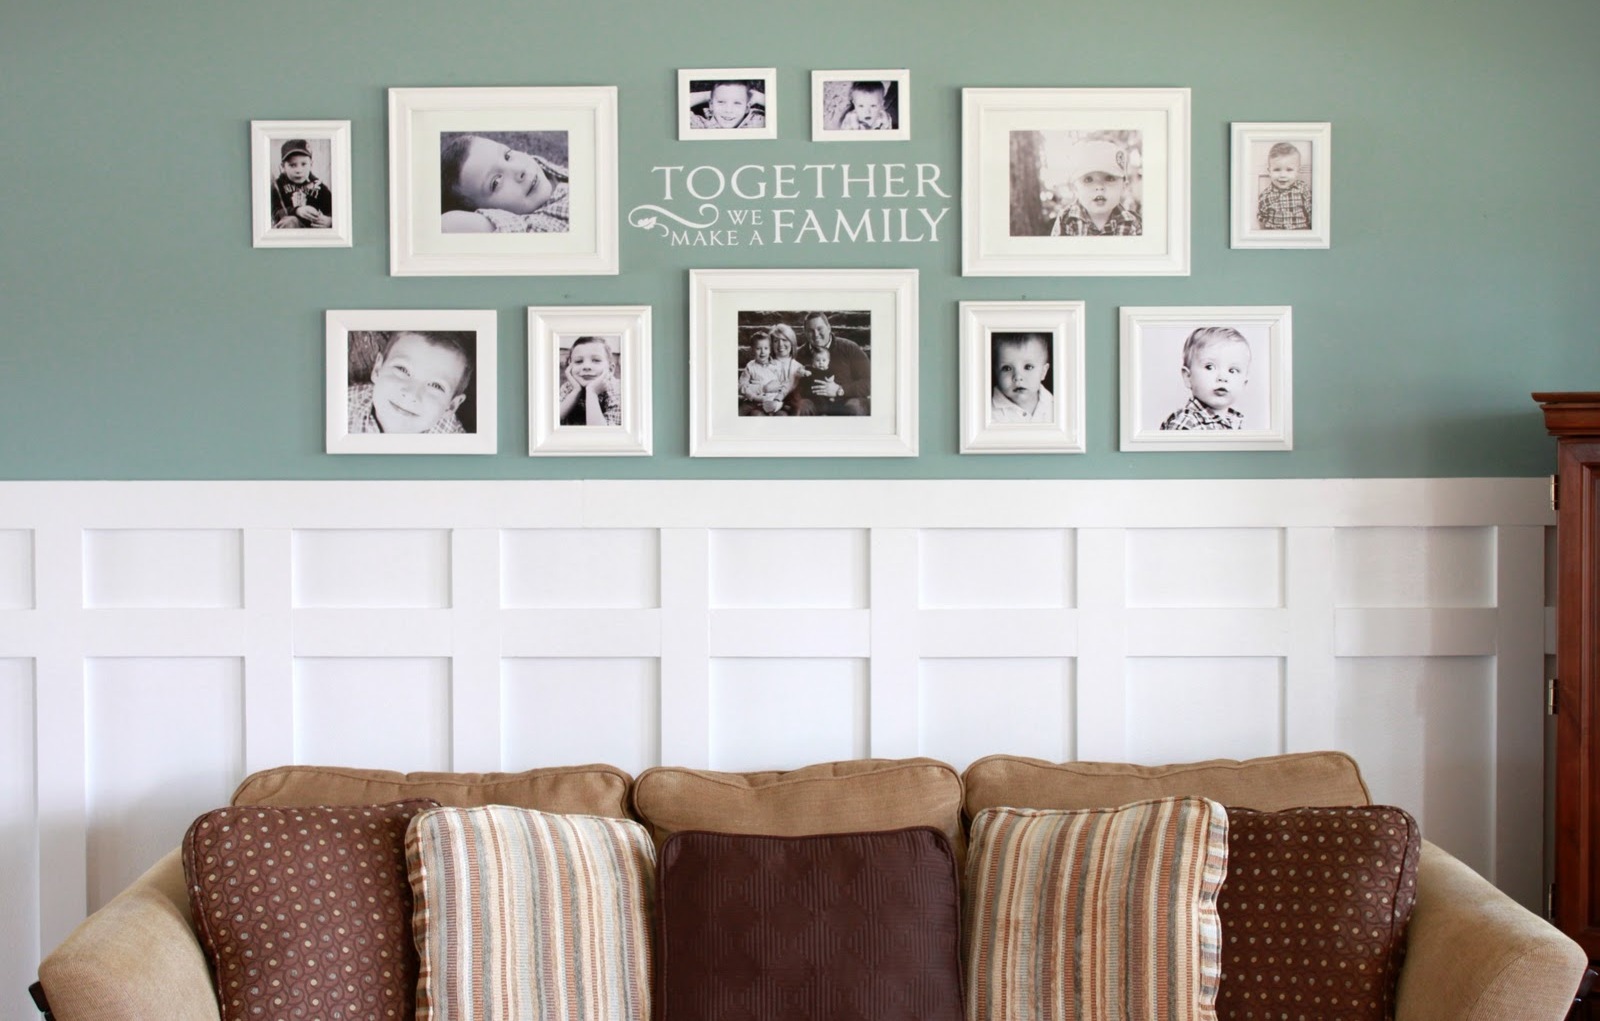 Photo Wall Mixed Framed Photo Wall Decorating Ideas Mixed With Letter Pattern Over Marshmallow Molding Wainscoting Lovely And Inspiring Wall Decorating Ideas For Your Room